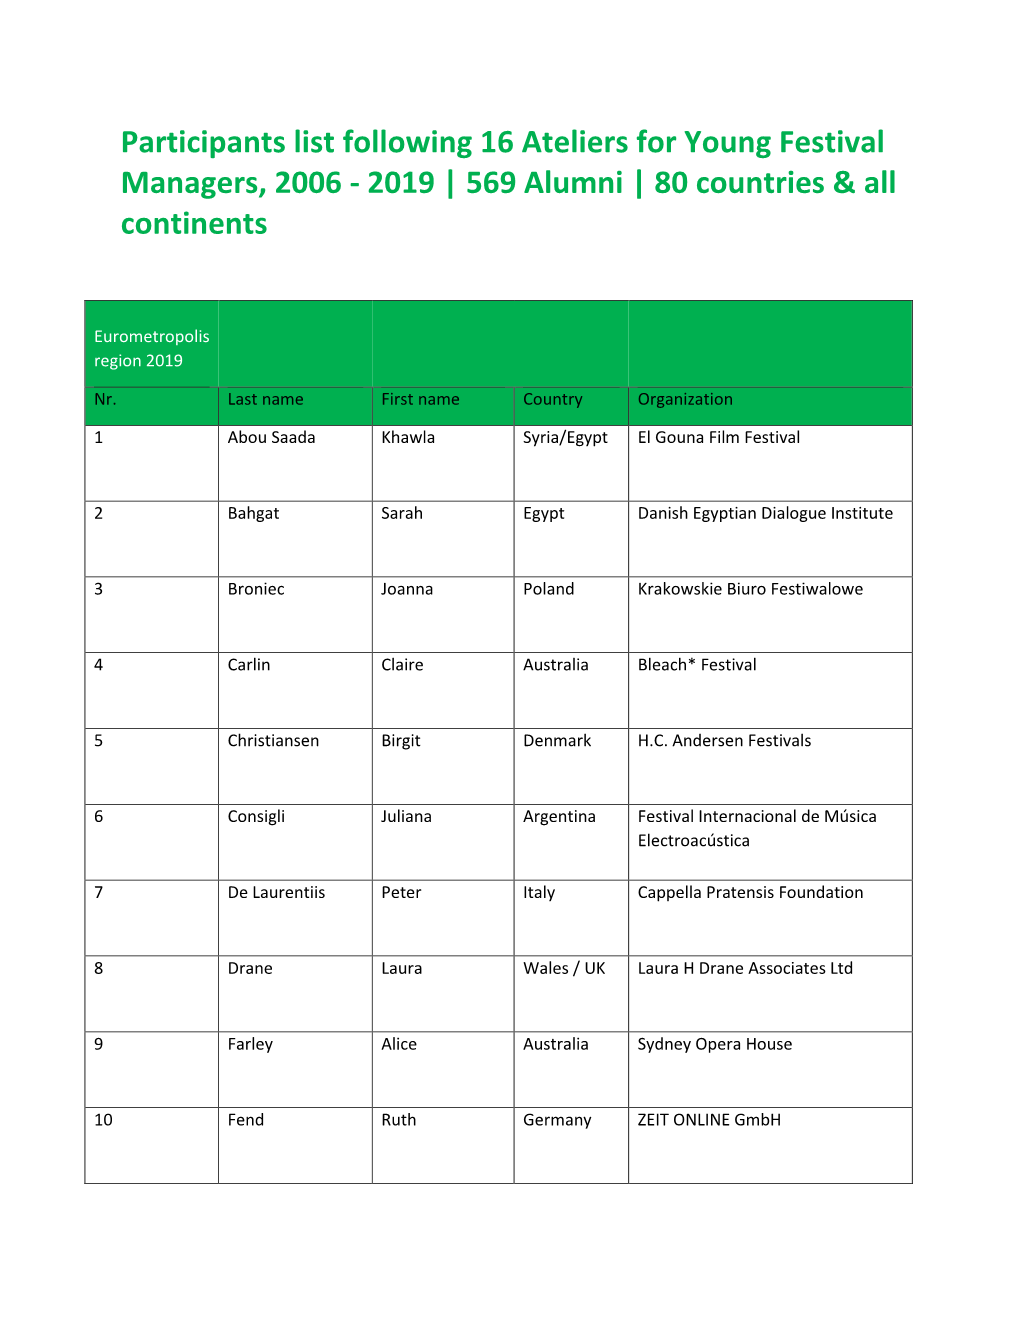 Participants List Following 16 Ateliers for Young Festival Managers, 2006 - 2019 | 569 Alumni | 80 Countries & All Continents